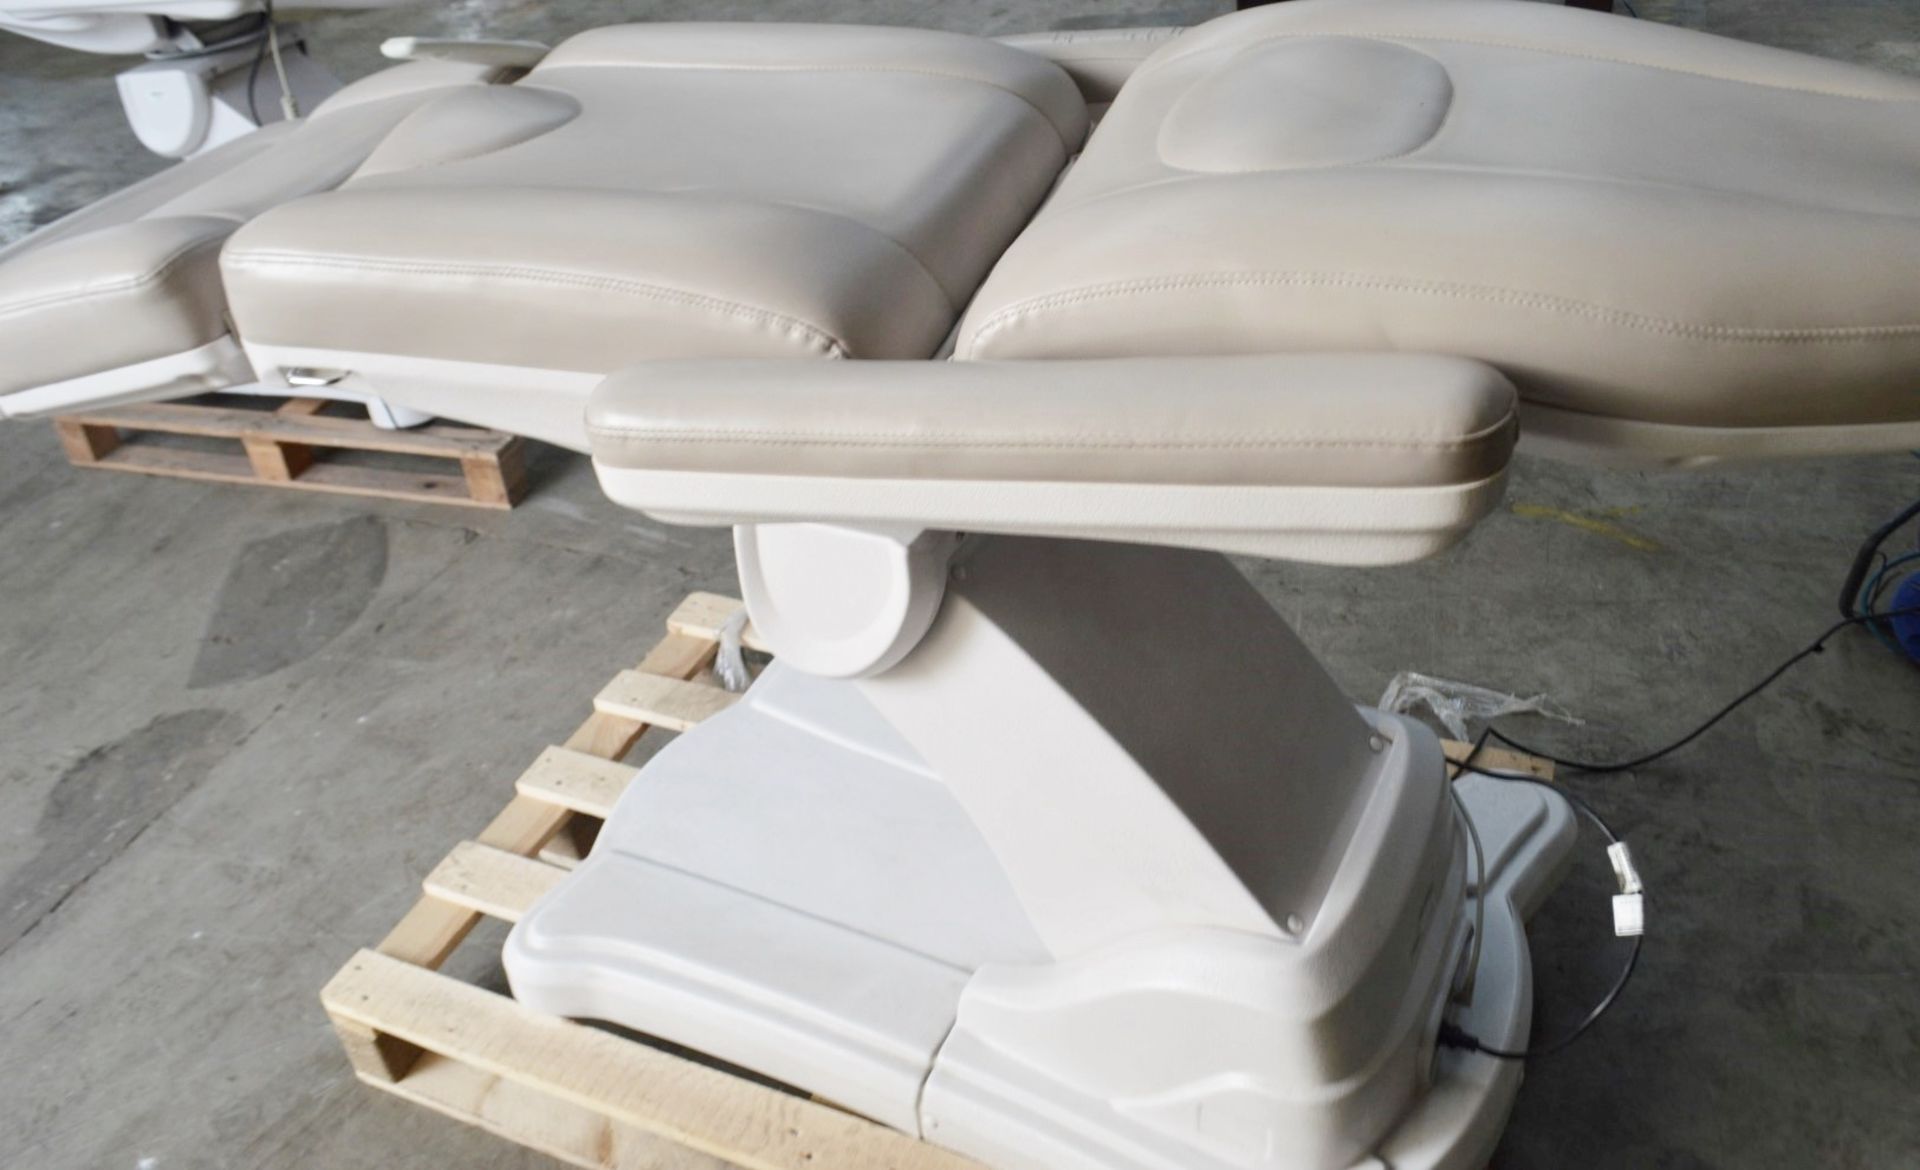 1 x Professional Electric-Hydraulic Massage Table Spa Bed With Remote Control - See Full Description - Image 11 of 15